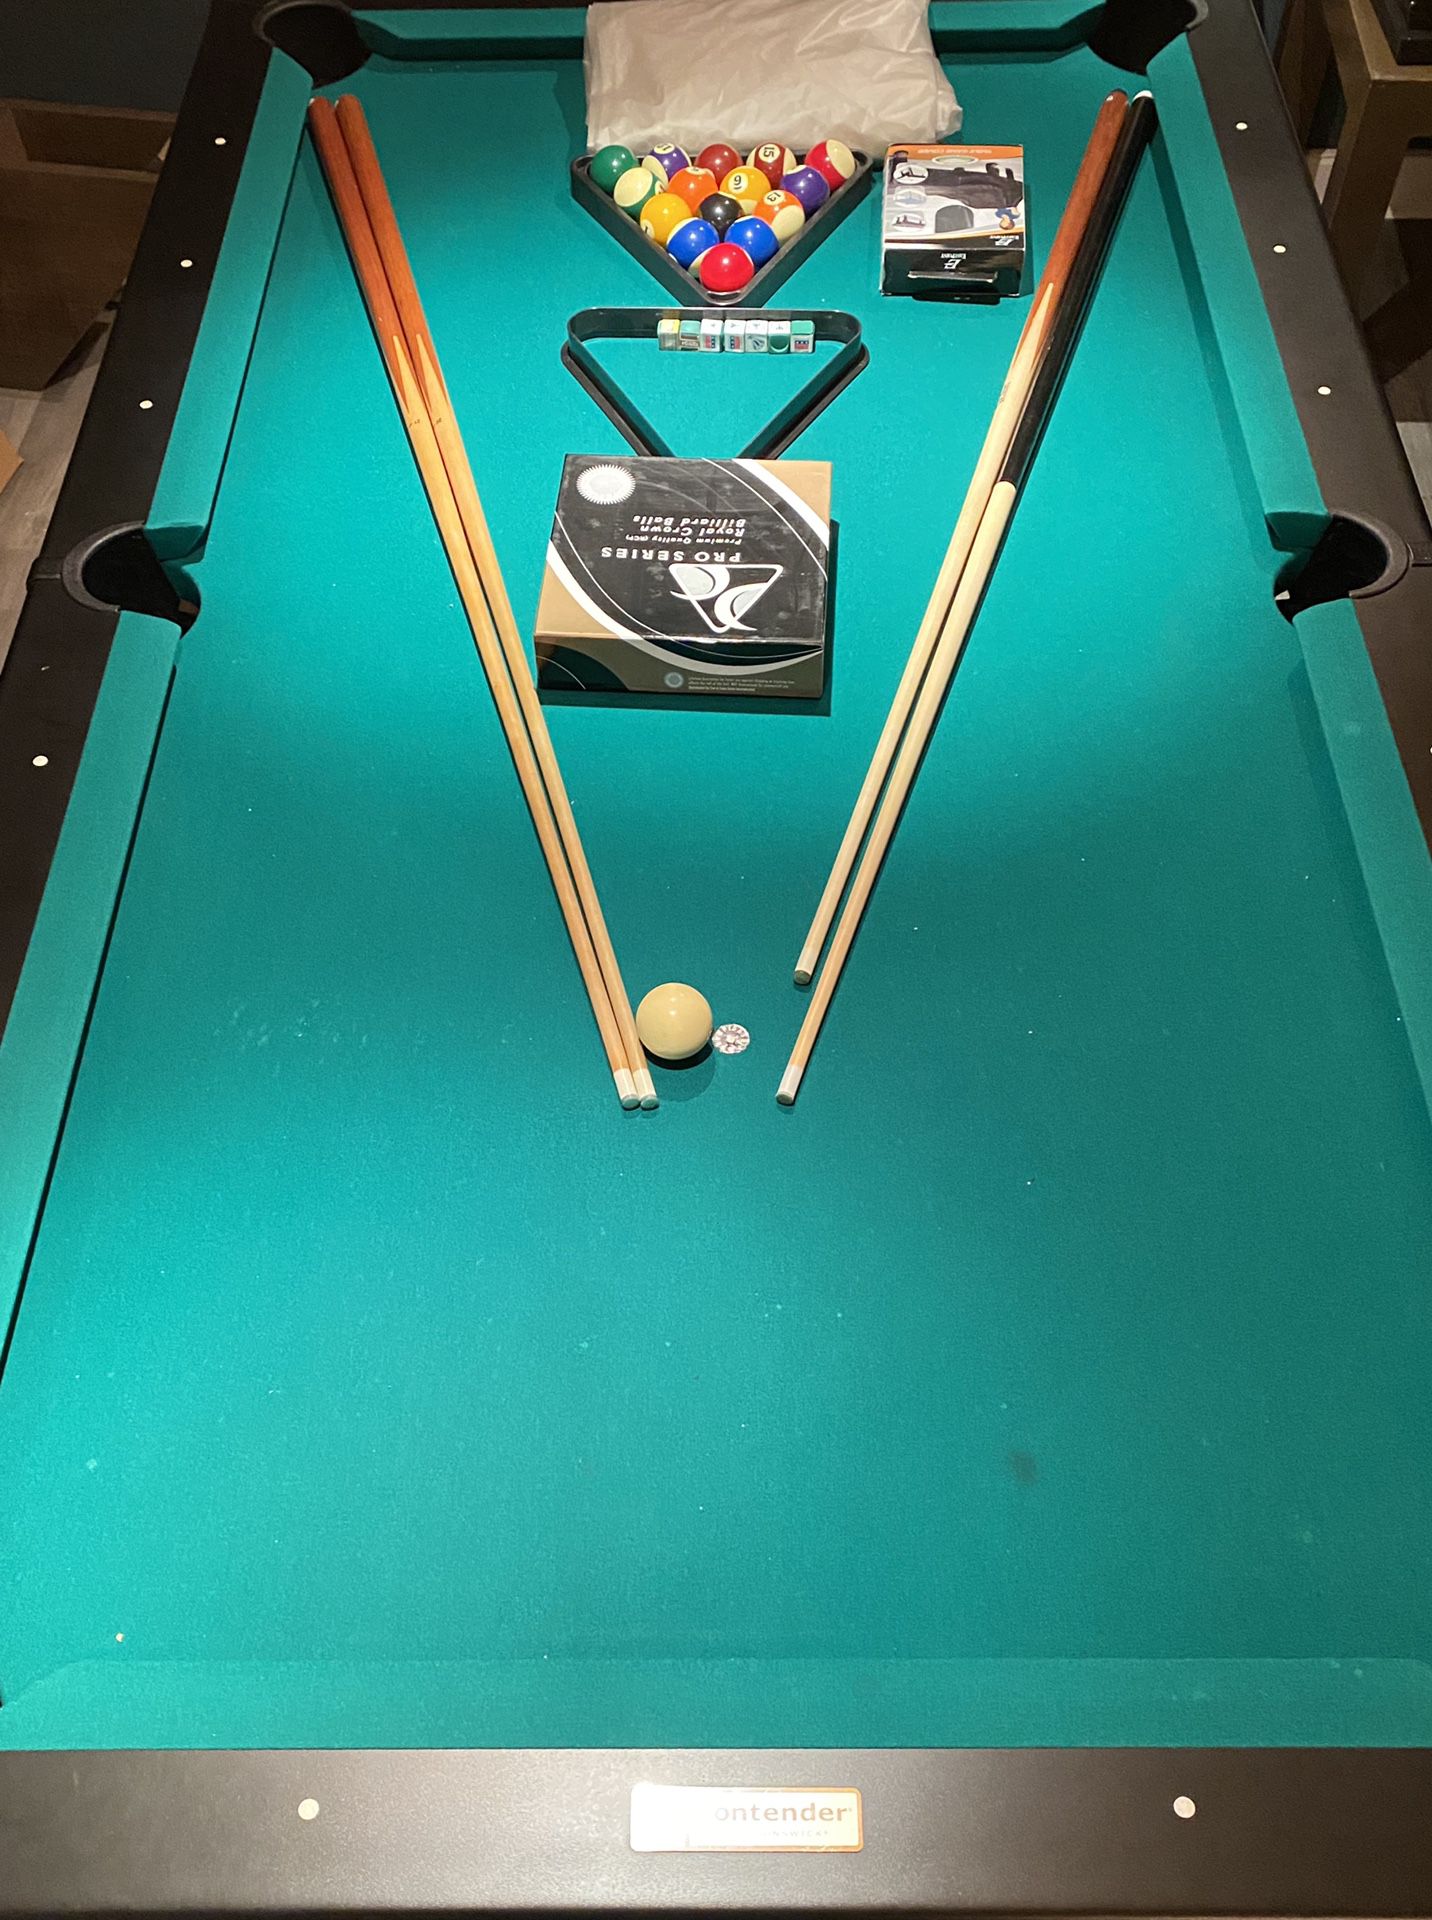 7” Slate Contender Pool Table & Accessories for Sale - $650